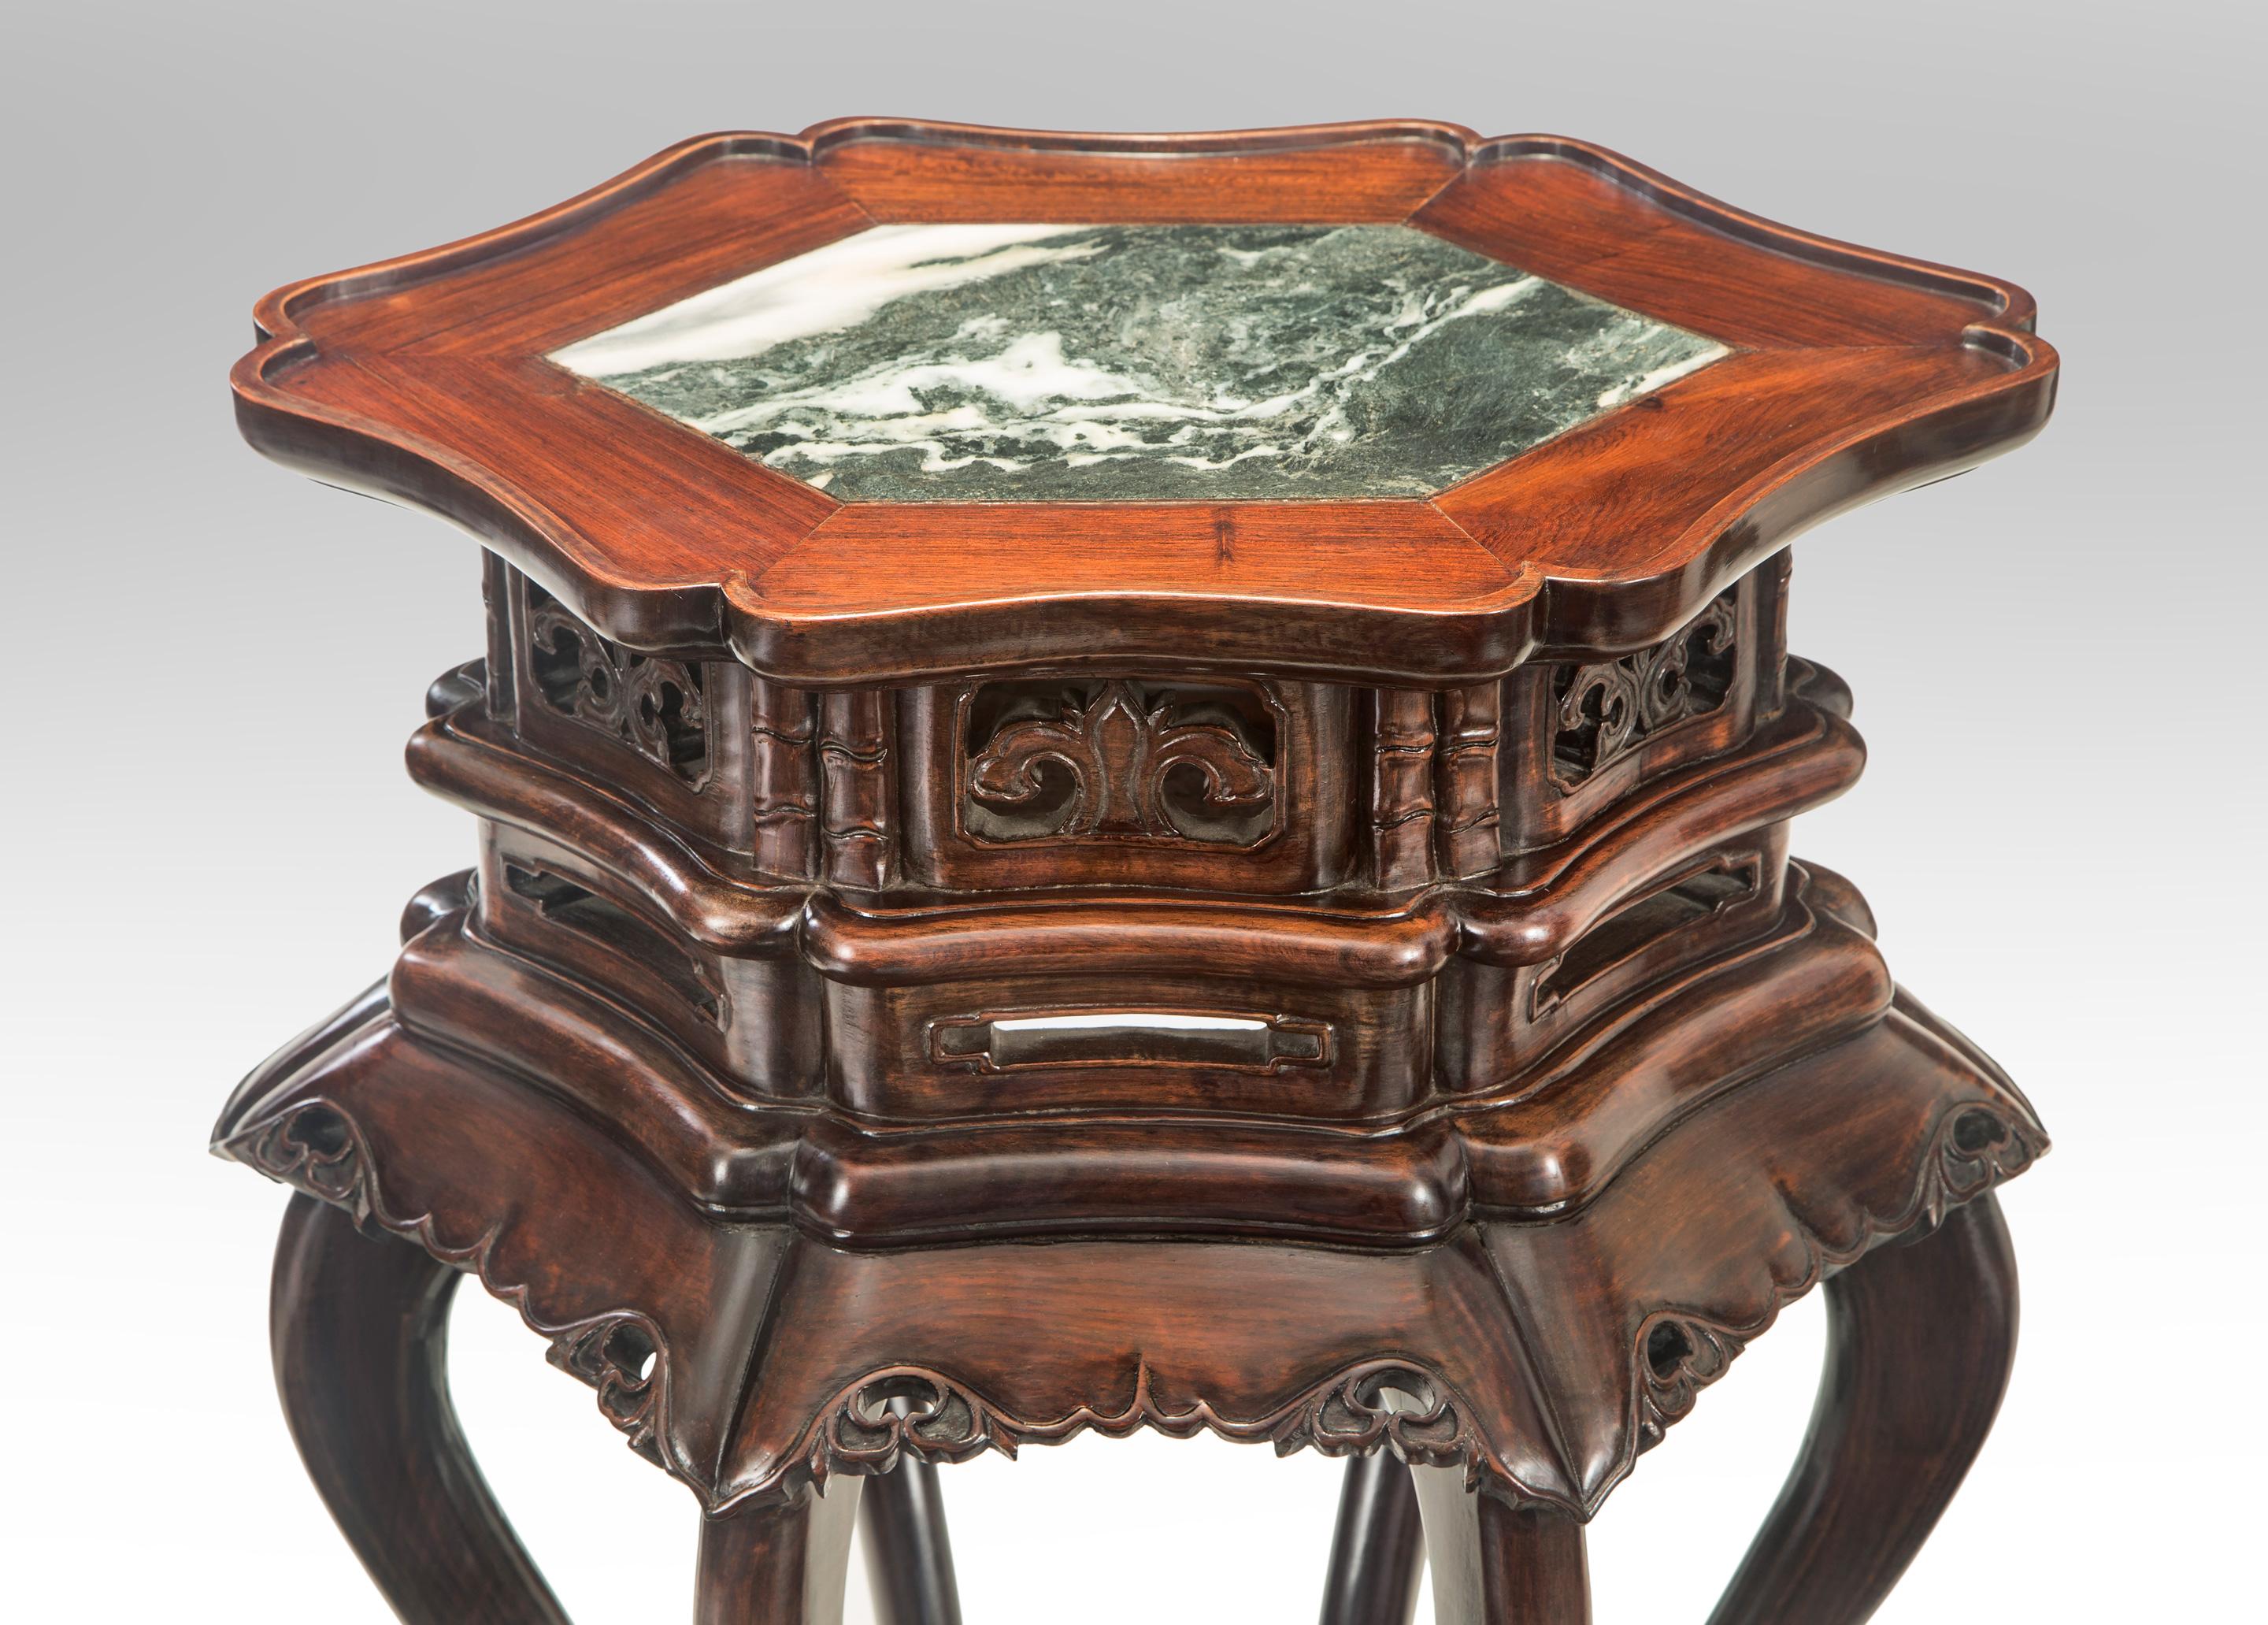 Pair of Chinese hardwood tables with inset marble tops
Late Qing Dynasty, 19th century
Stunning tables of unusual quality. Each shaped six-sided top inset with a beautiful figured marble, above a pierced frieze and foliate apron, raised on six